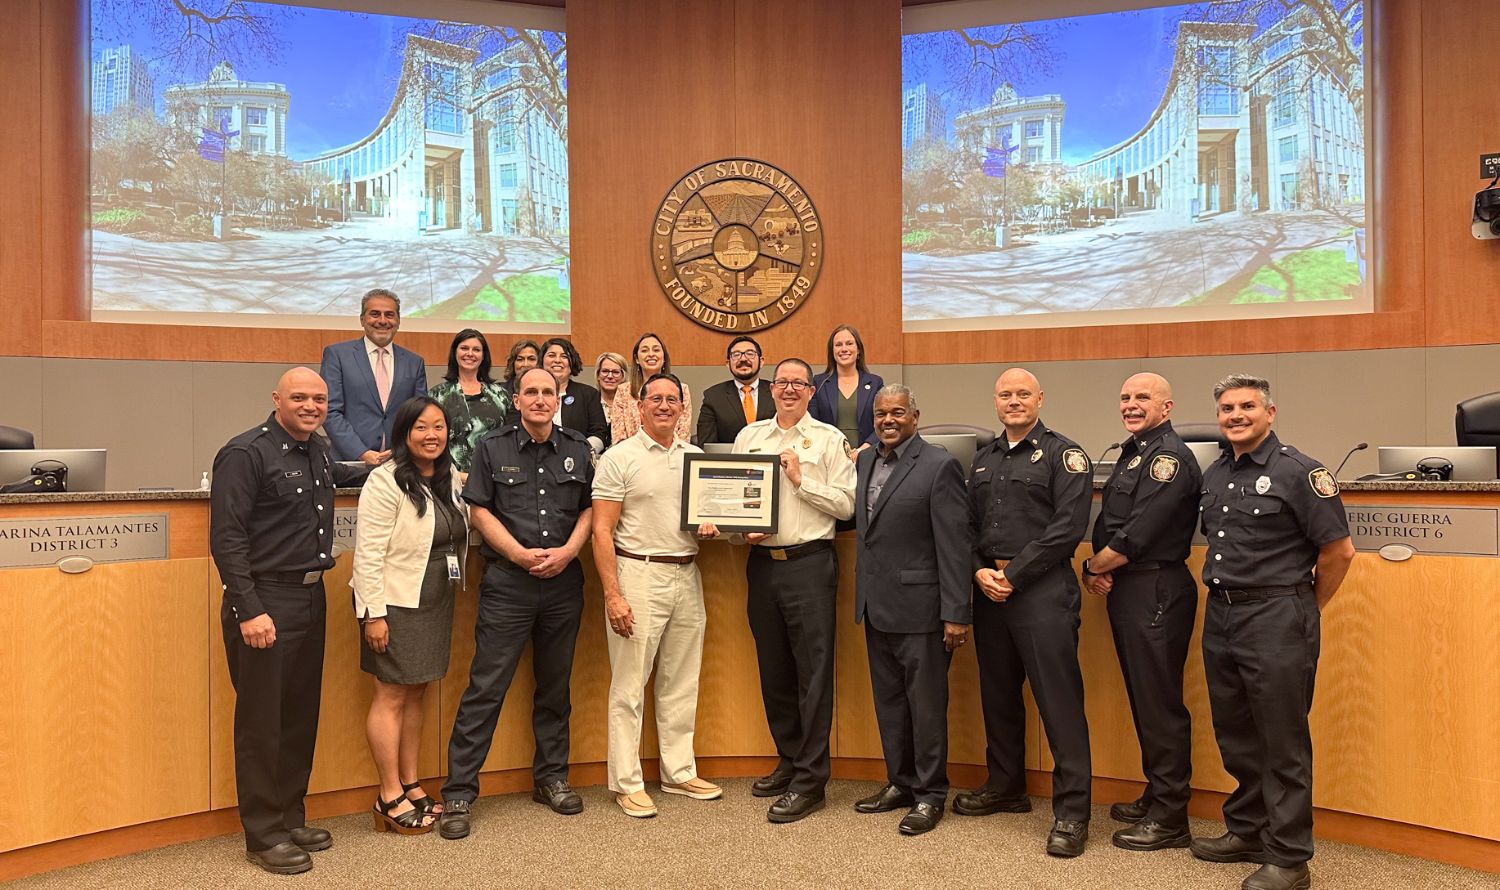 Sacramento Fire and Sacramento City council posing with a certificate inside the Council Chambers